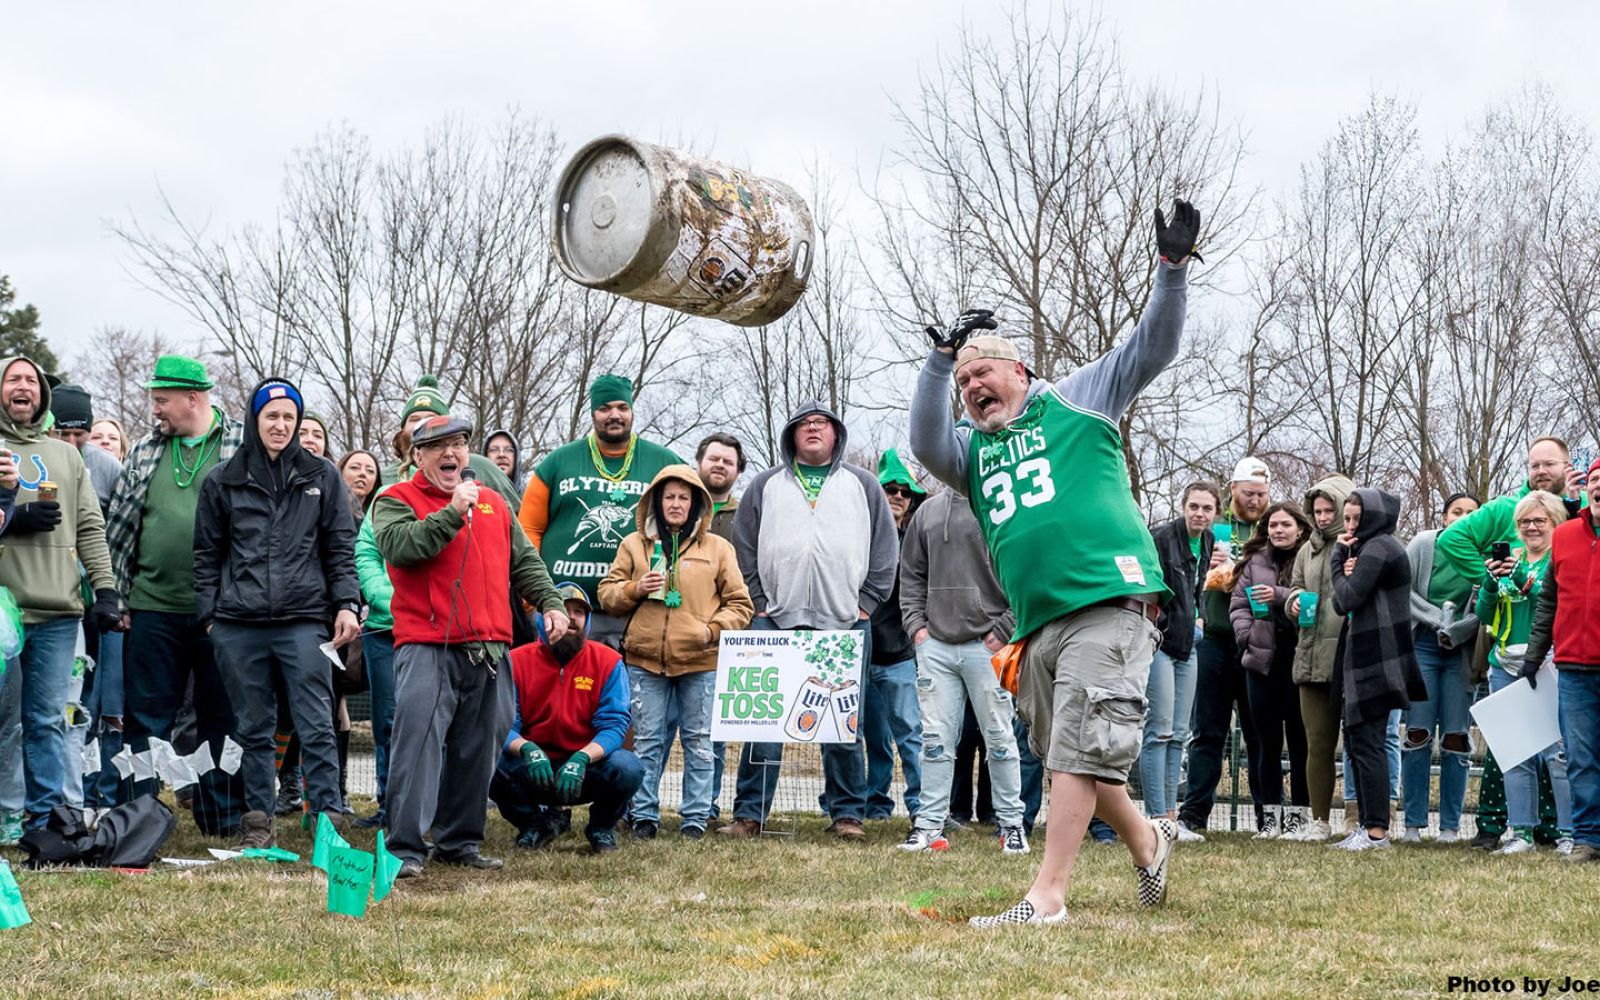 The keg toss is a popular attraction during Deer Park Irish Pub’s annual Clover Classic. This year’s keg toss is set for 4 p.m. Saturday, March 16.